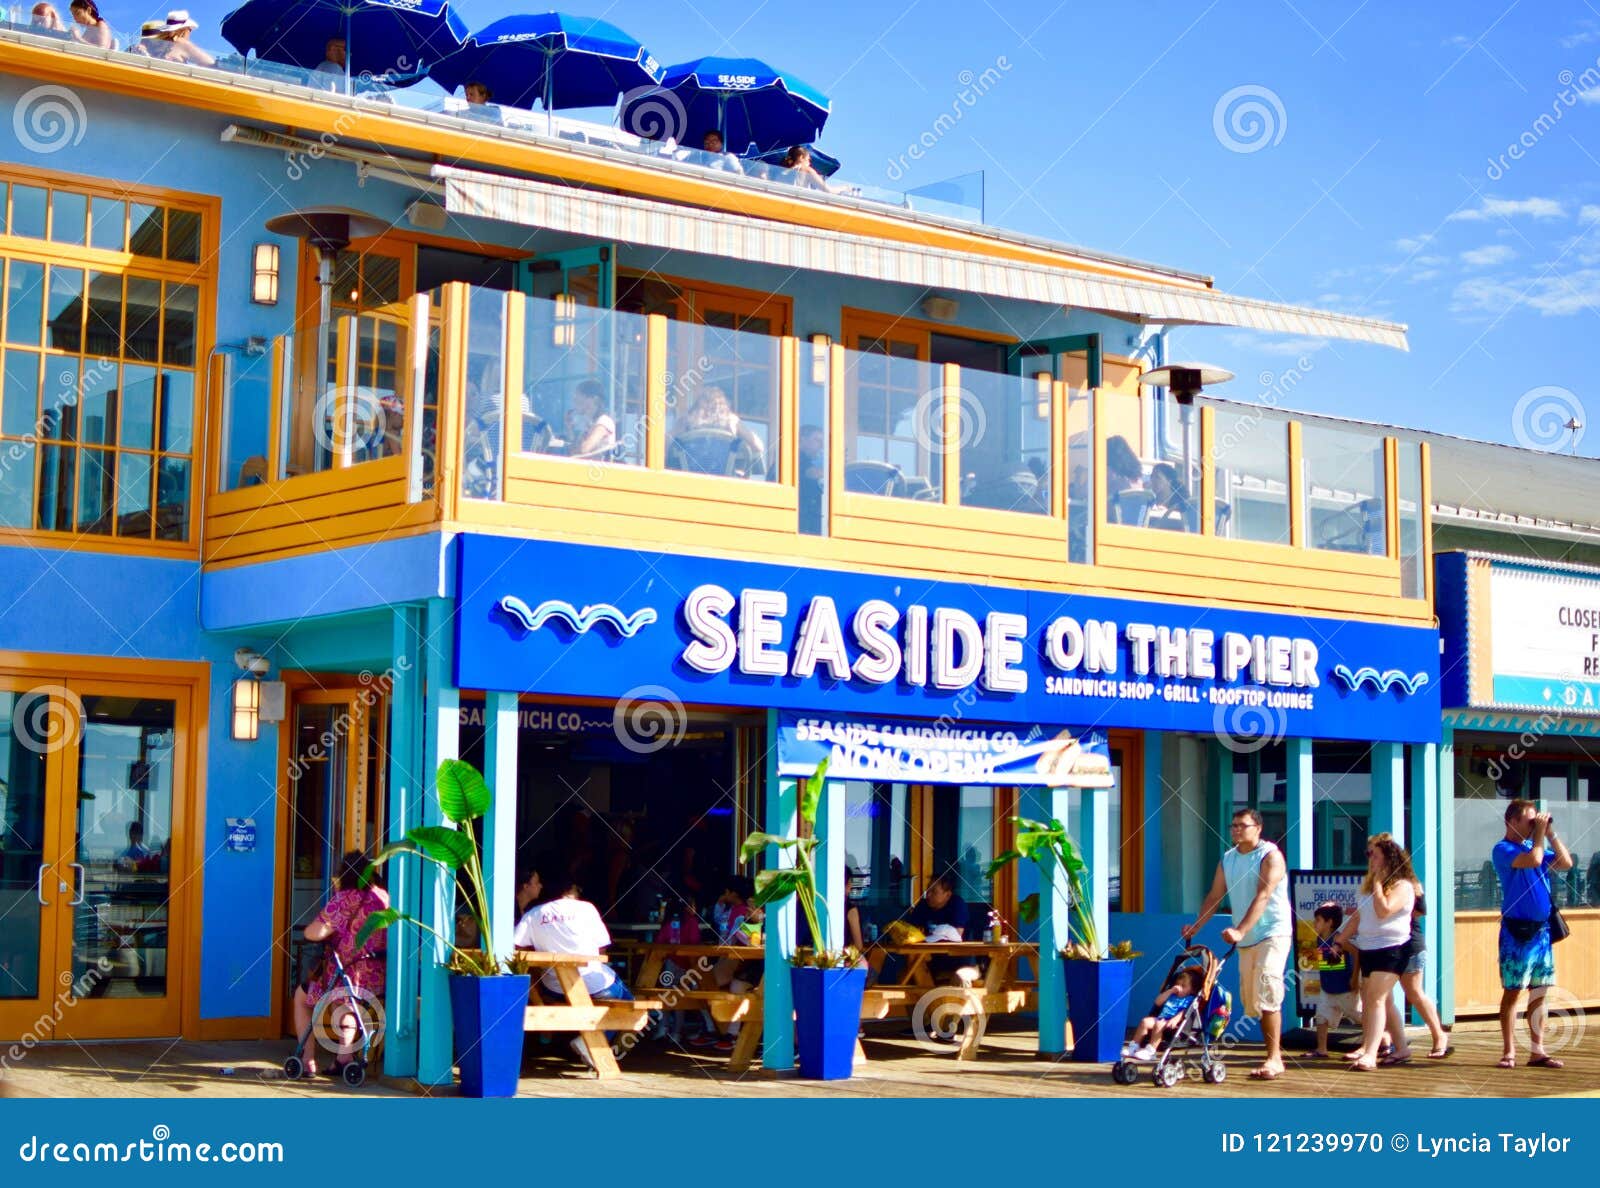 Seaside Restaurant on the Pier Editorial Image - Image of restaurant,  colorful: 121239970